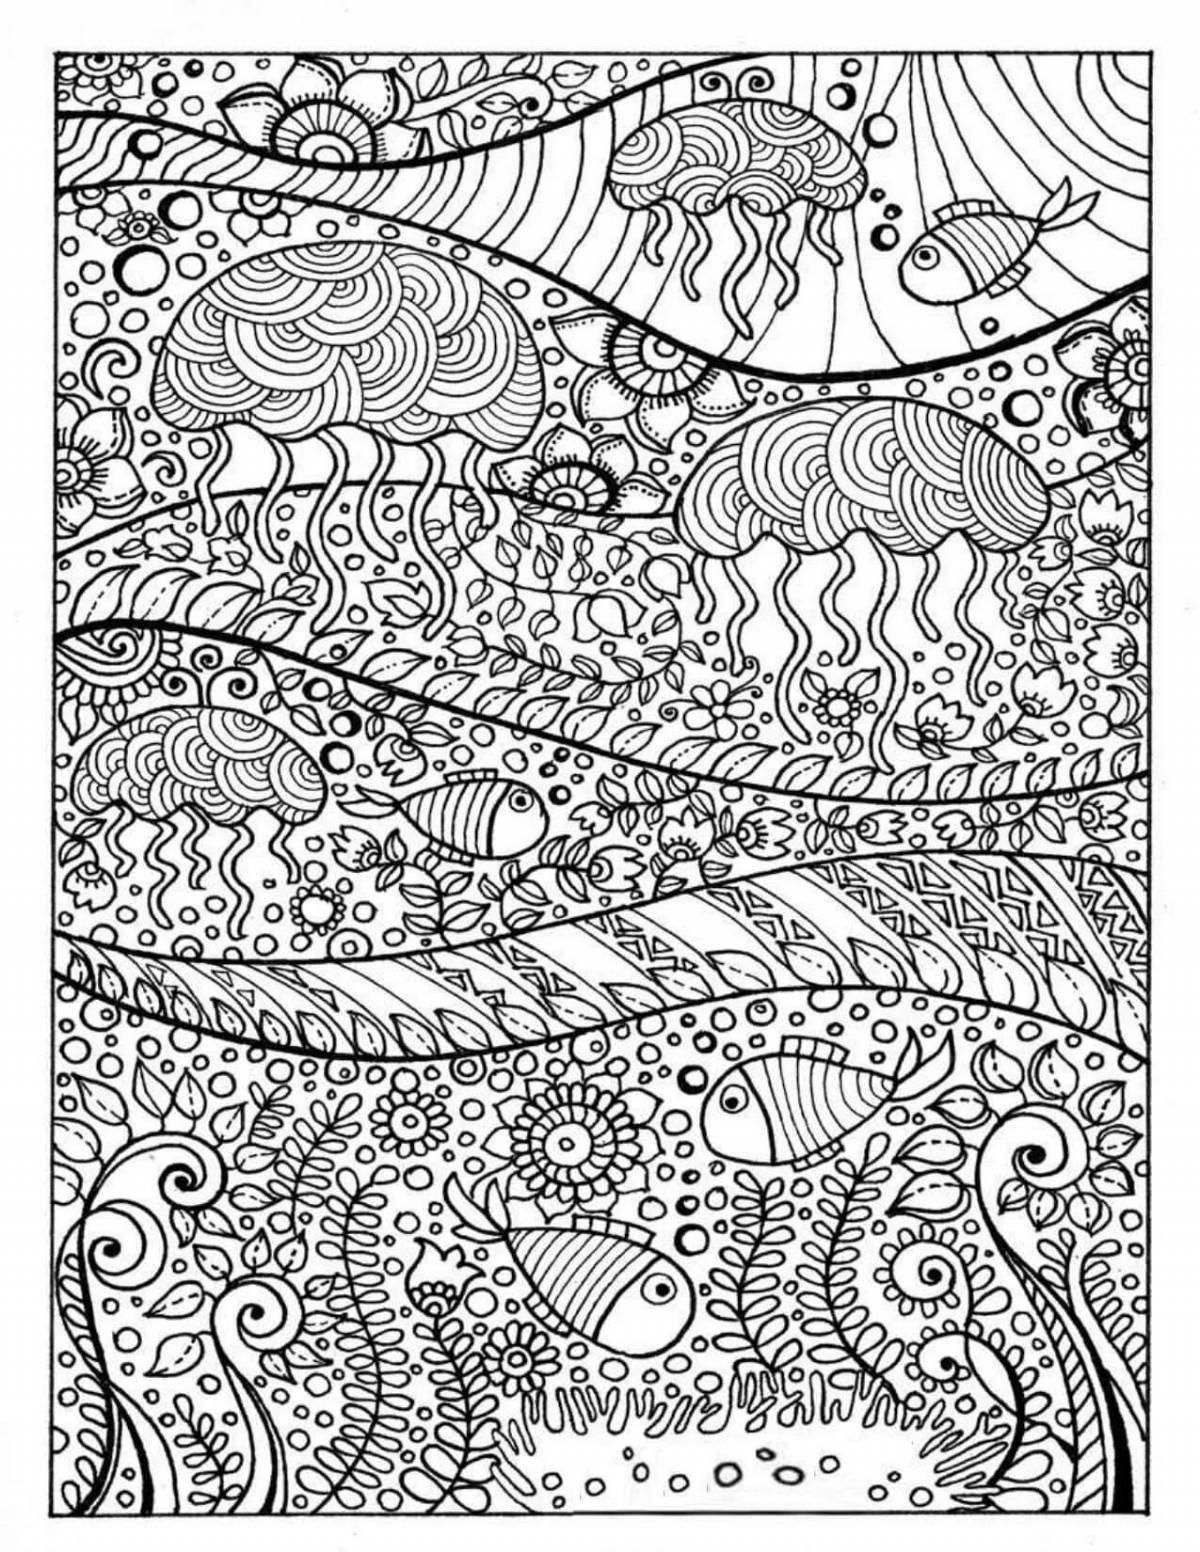 Poetry stress relief coloring book